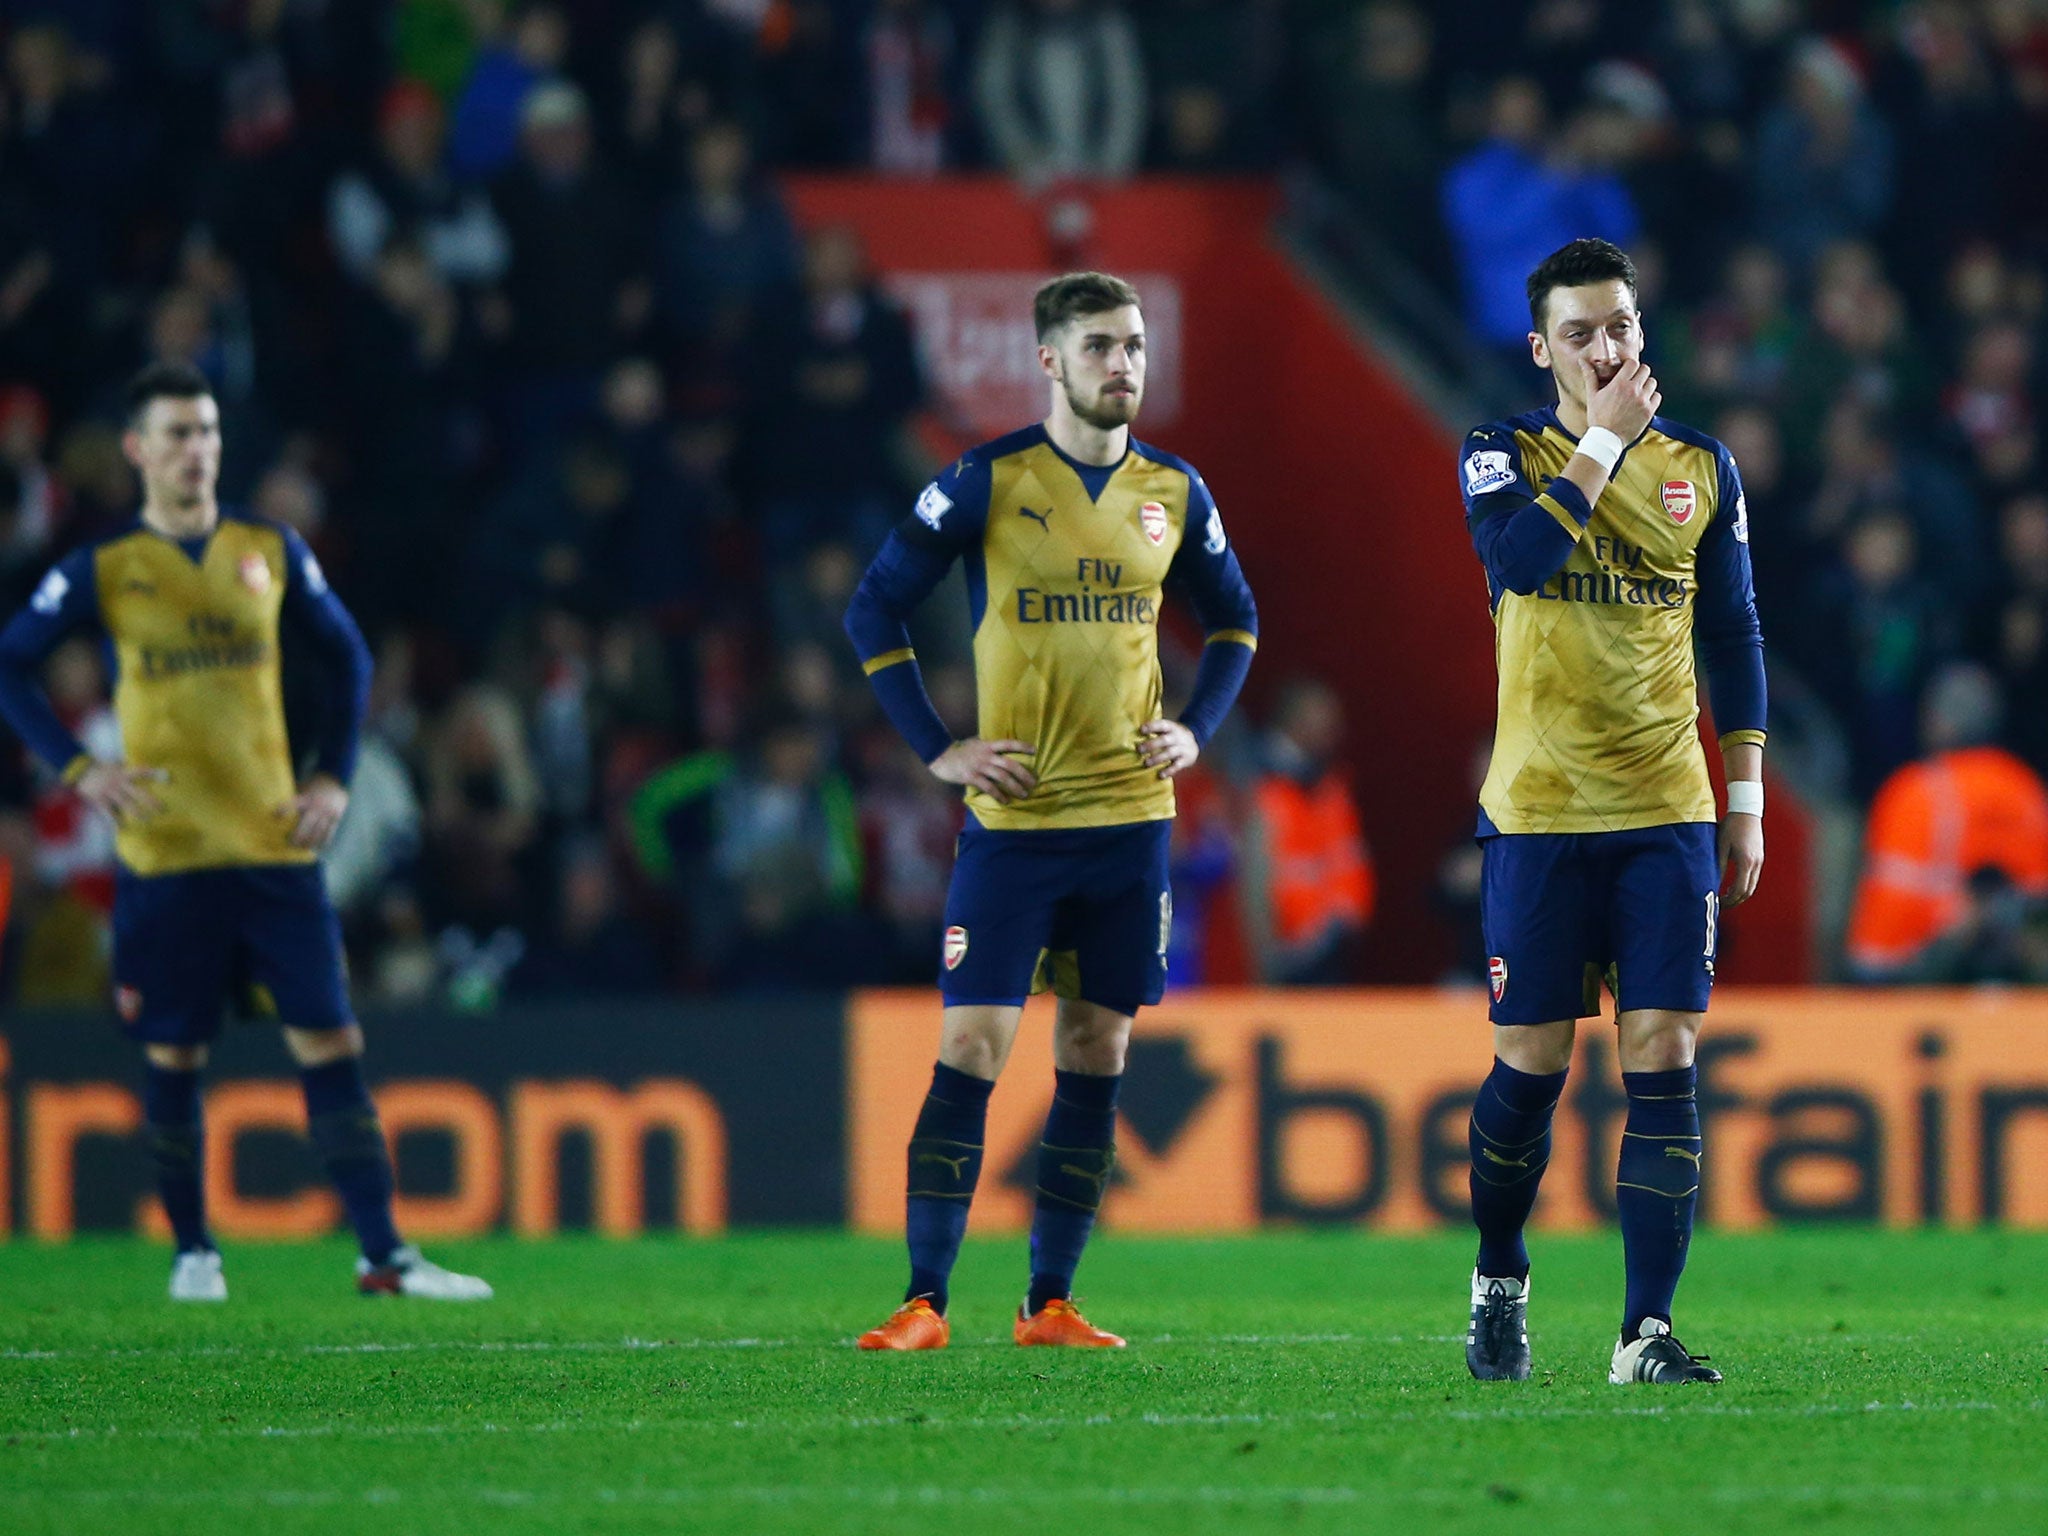 Arsenal players react after losing to Southampton 4-0 on Boxing Day